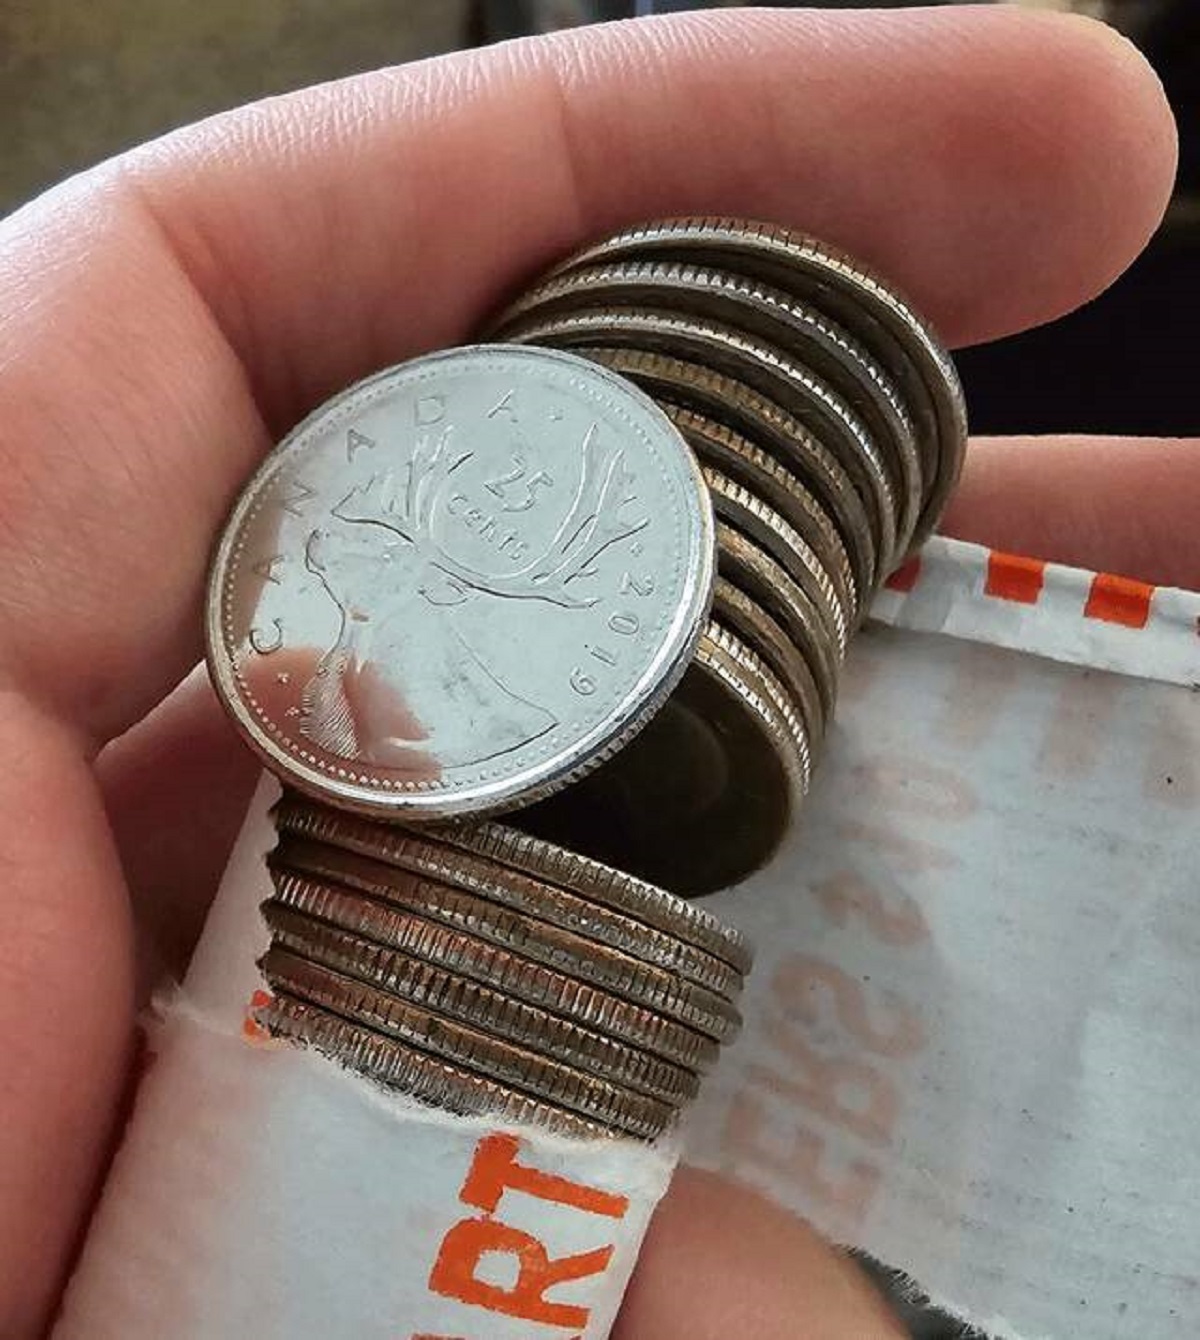 "My roll of US quarters from the bank contained a Canadian quarter"